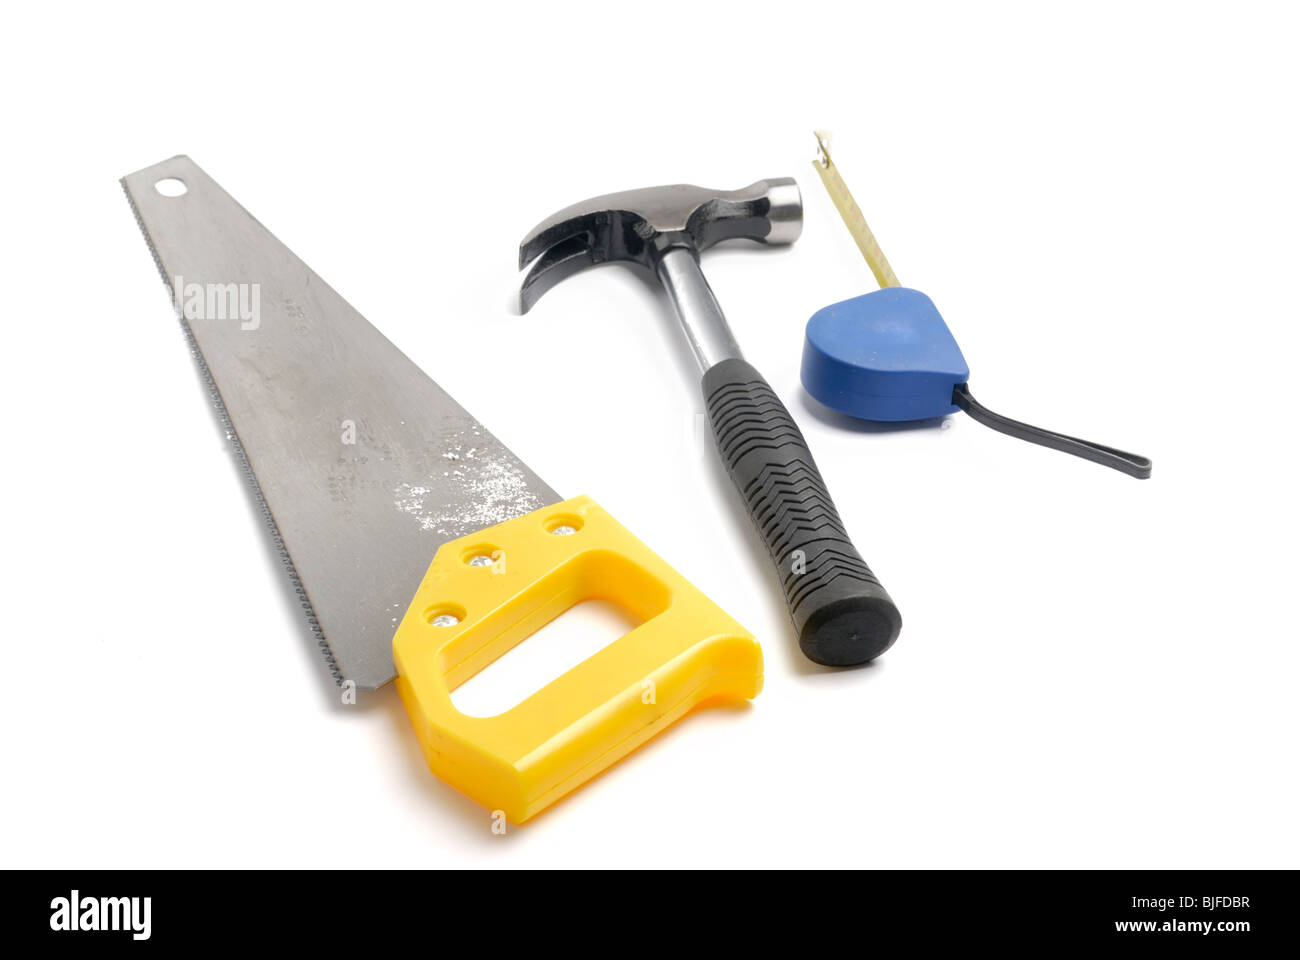 Tape measure, hammer and saw Stock Photo